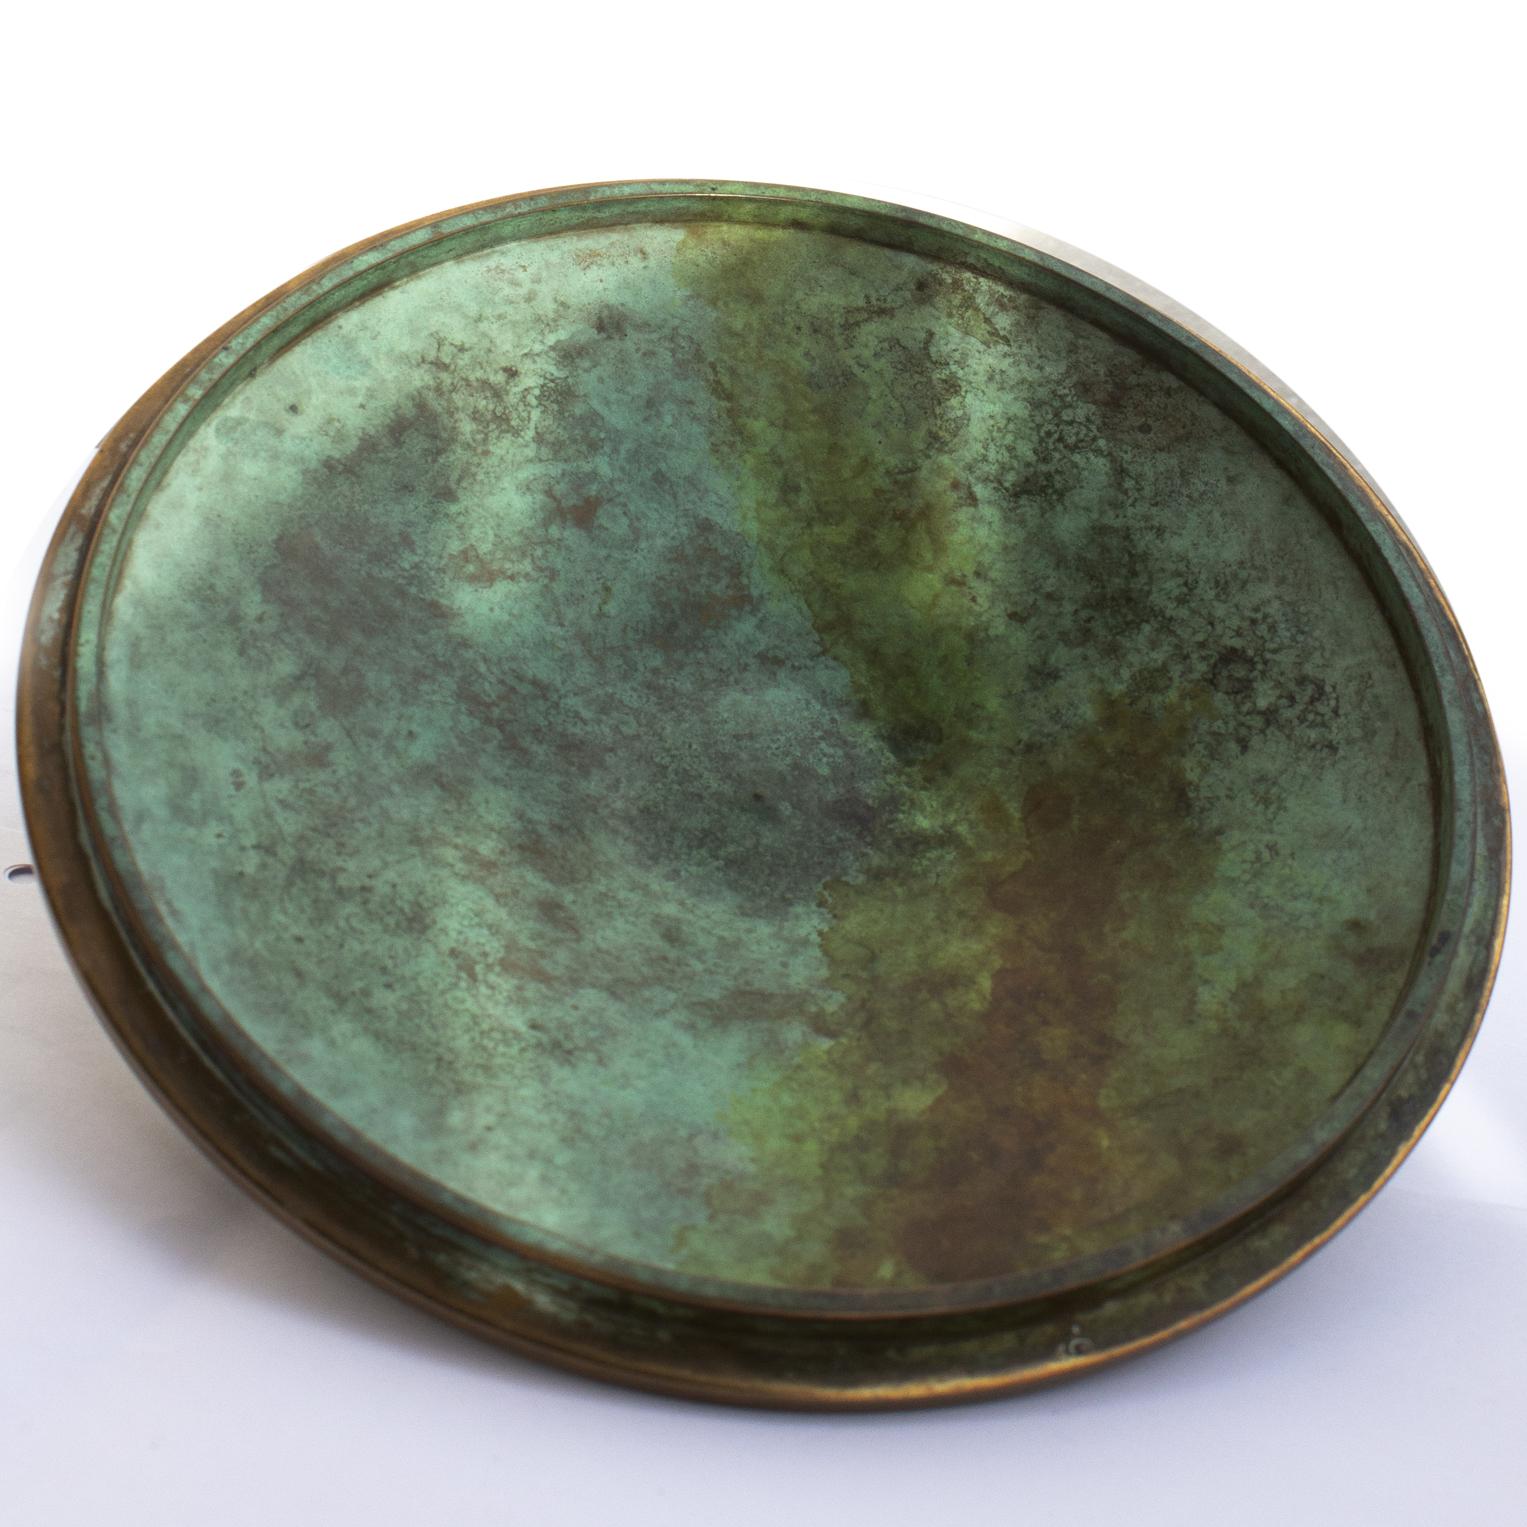 Scandinavian Art Deco heavy decorative bronze bowl with lid designed and produced by Tinos Bronce in Denmark between 1940-1949. The bowl has a crisp relief ribbed pattern with polished vertical stripes alternating with recessed stripes finished in a